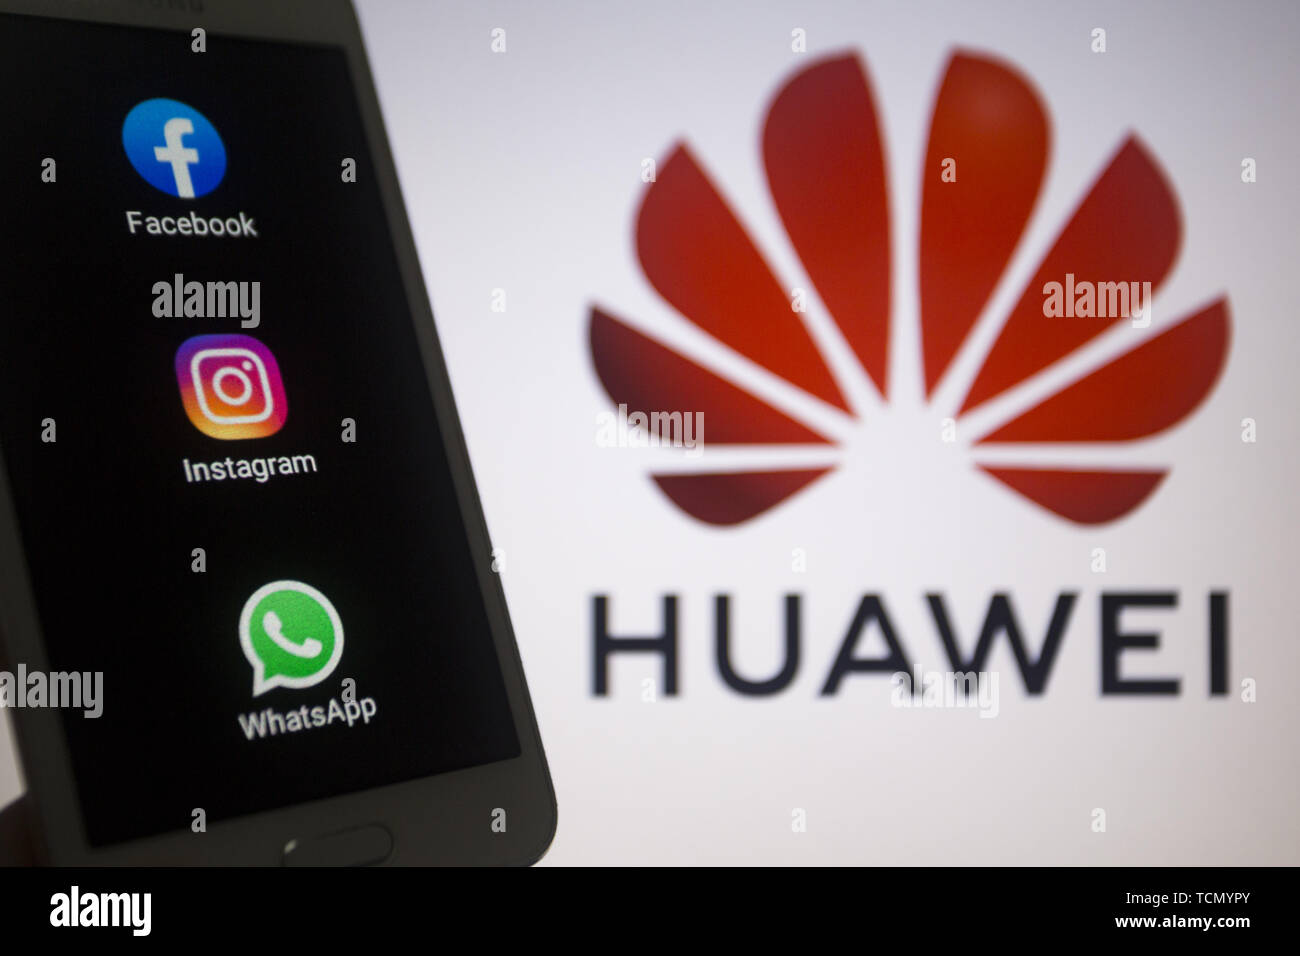 Asuncion, Paraguay. 8th June, 2019. Logos icons of Facebook, Instagram and WhatsApp apps are seen on a smartphone screen against Huawei logo unfocused on background. Credit: Andre M. Chang/ZUMA Wire/Alamy Live News Stock Photo